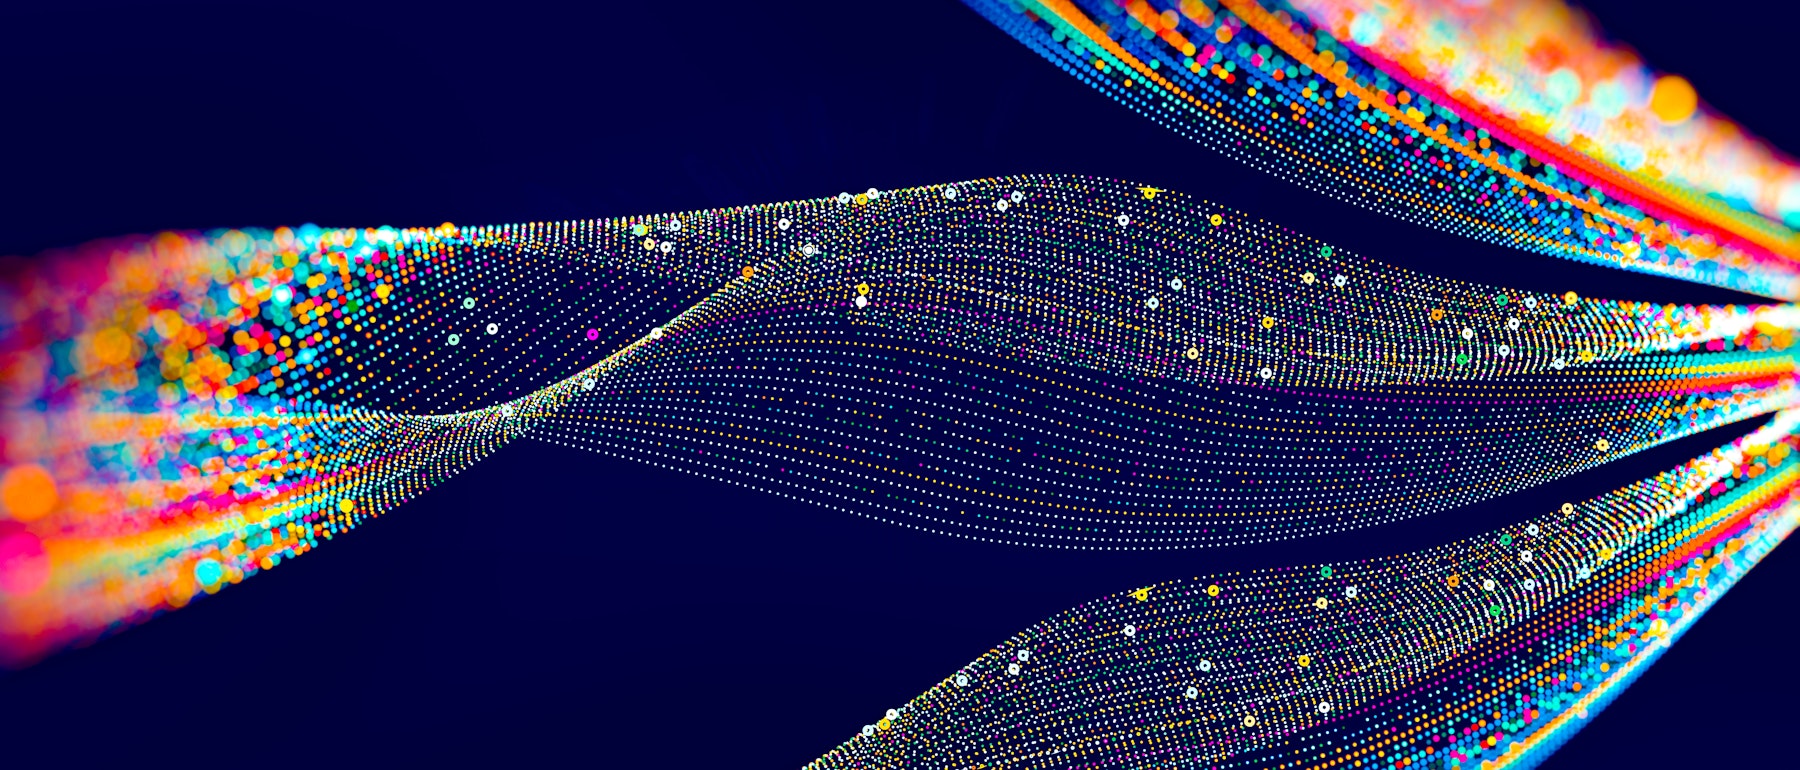 Energy Technology Perspectives 2023 cover photo of multicolored swirls on a navy background